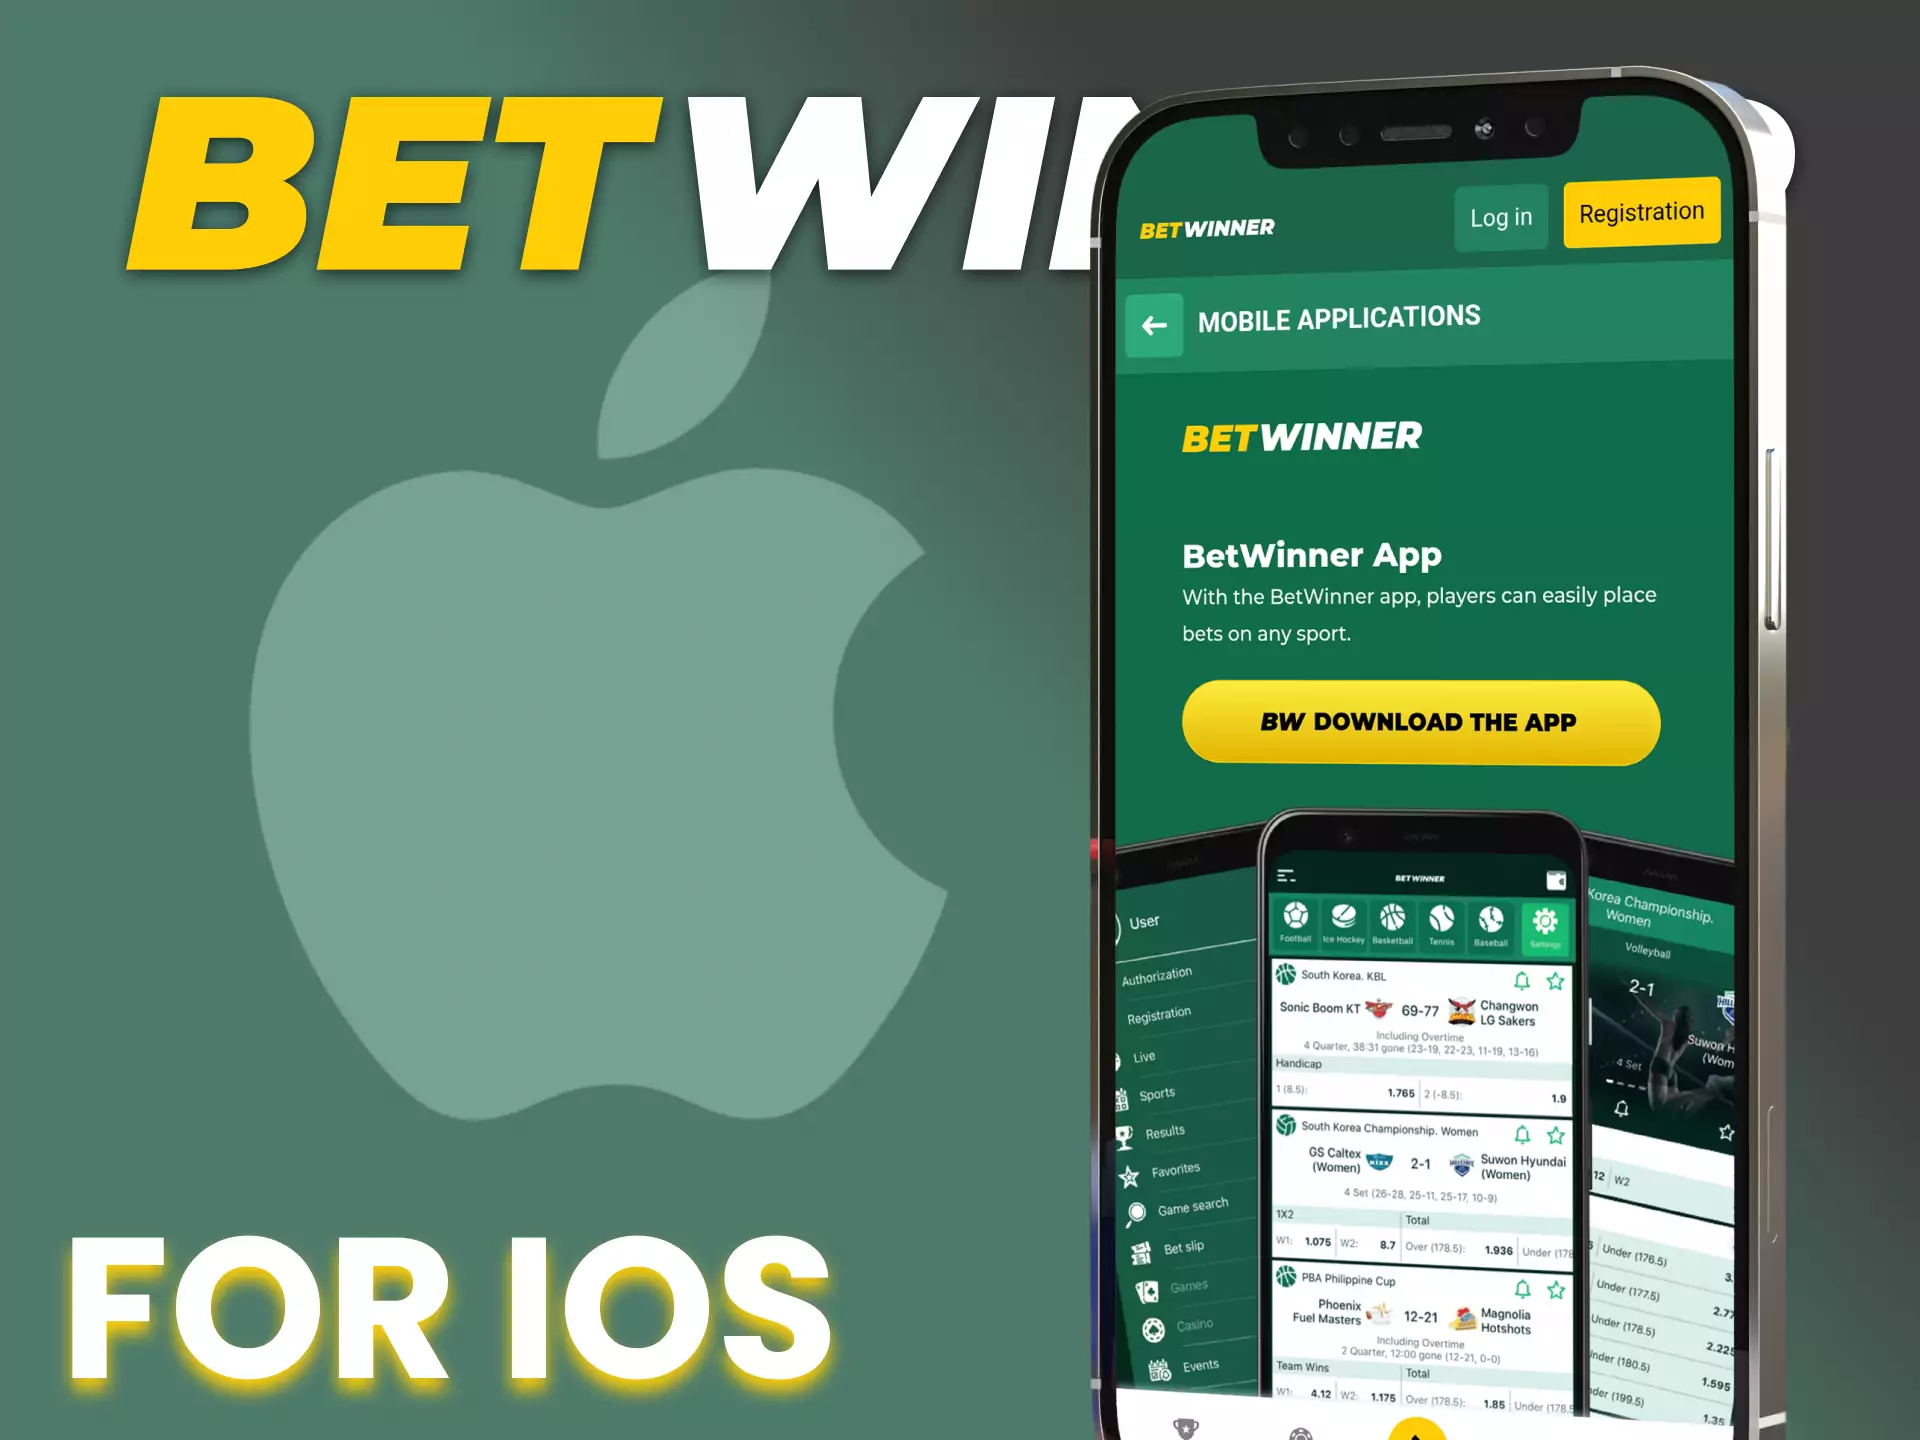 The Betwinner app is supported on your iOS device.